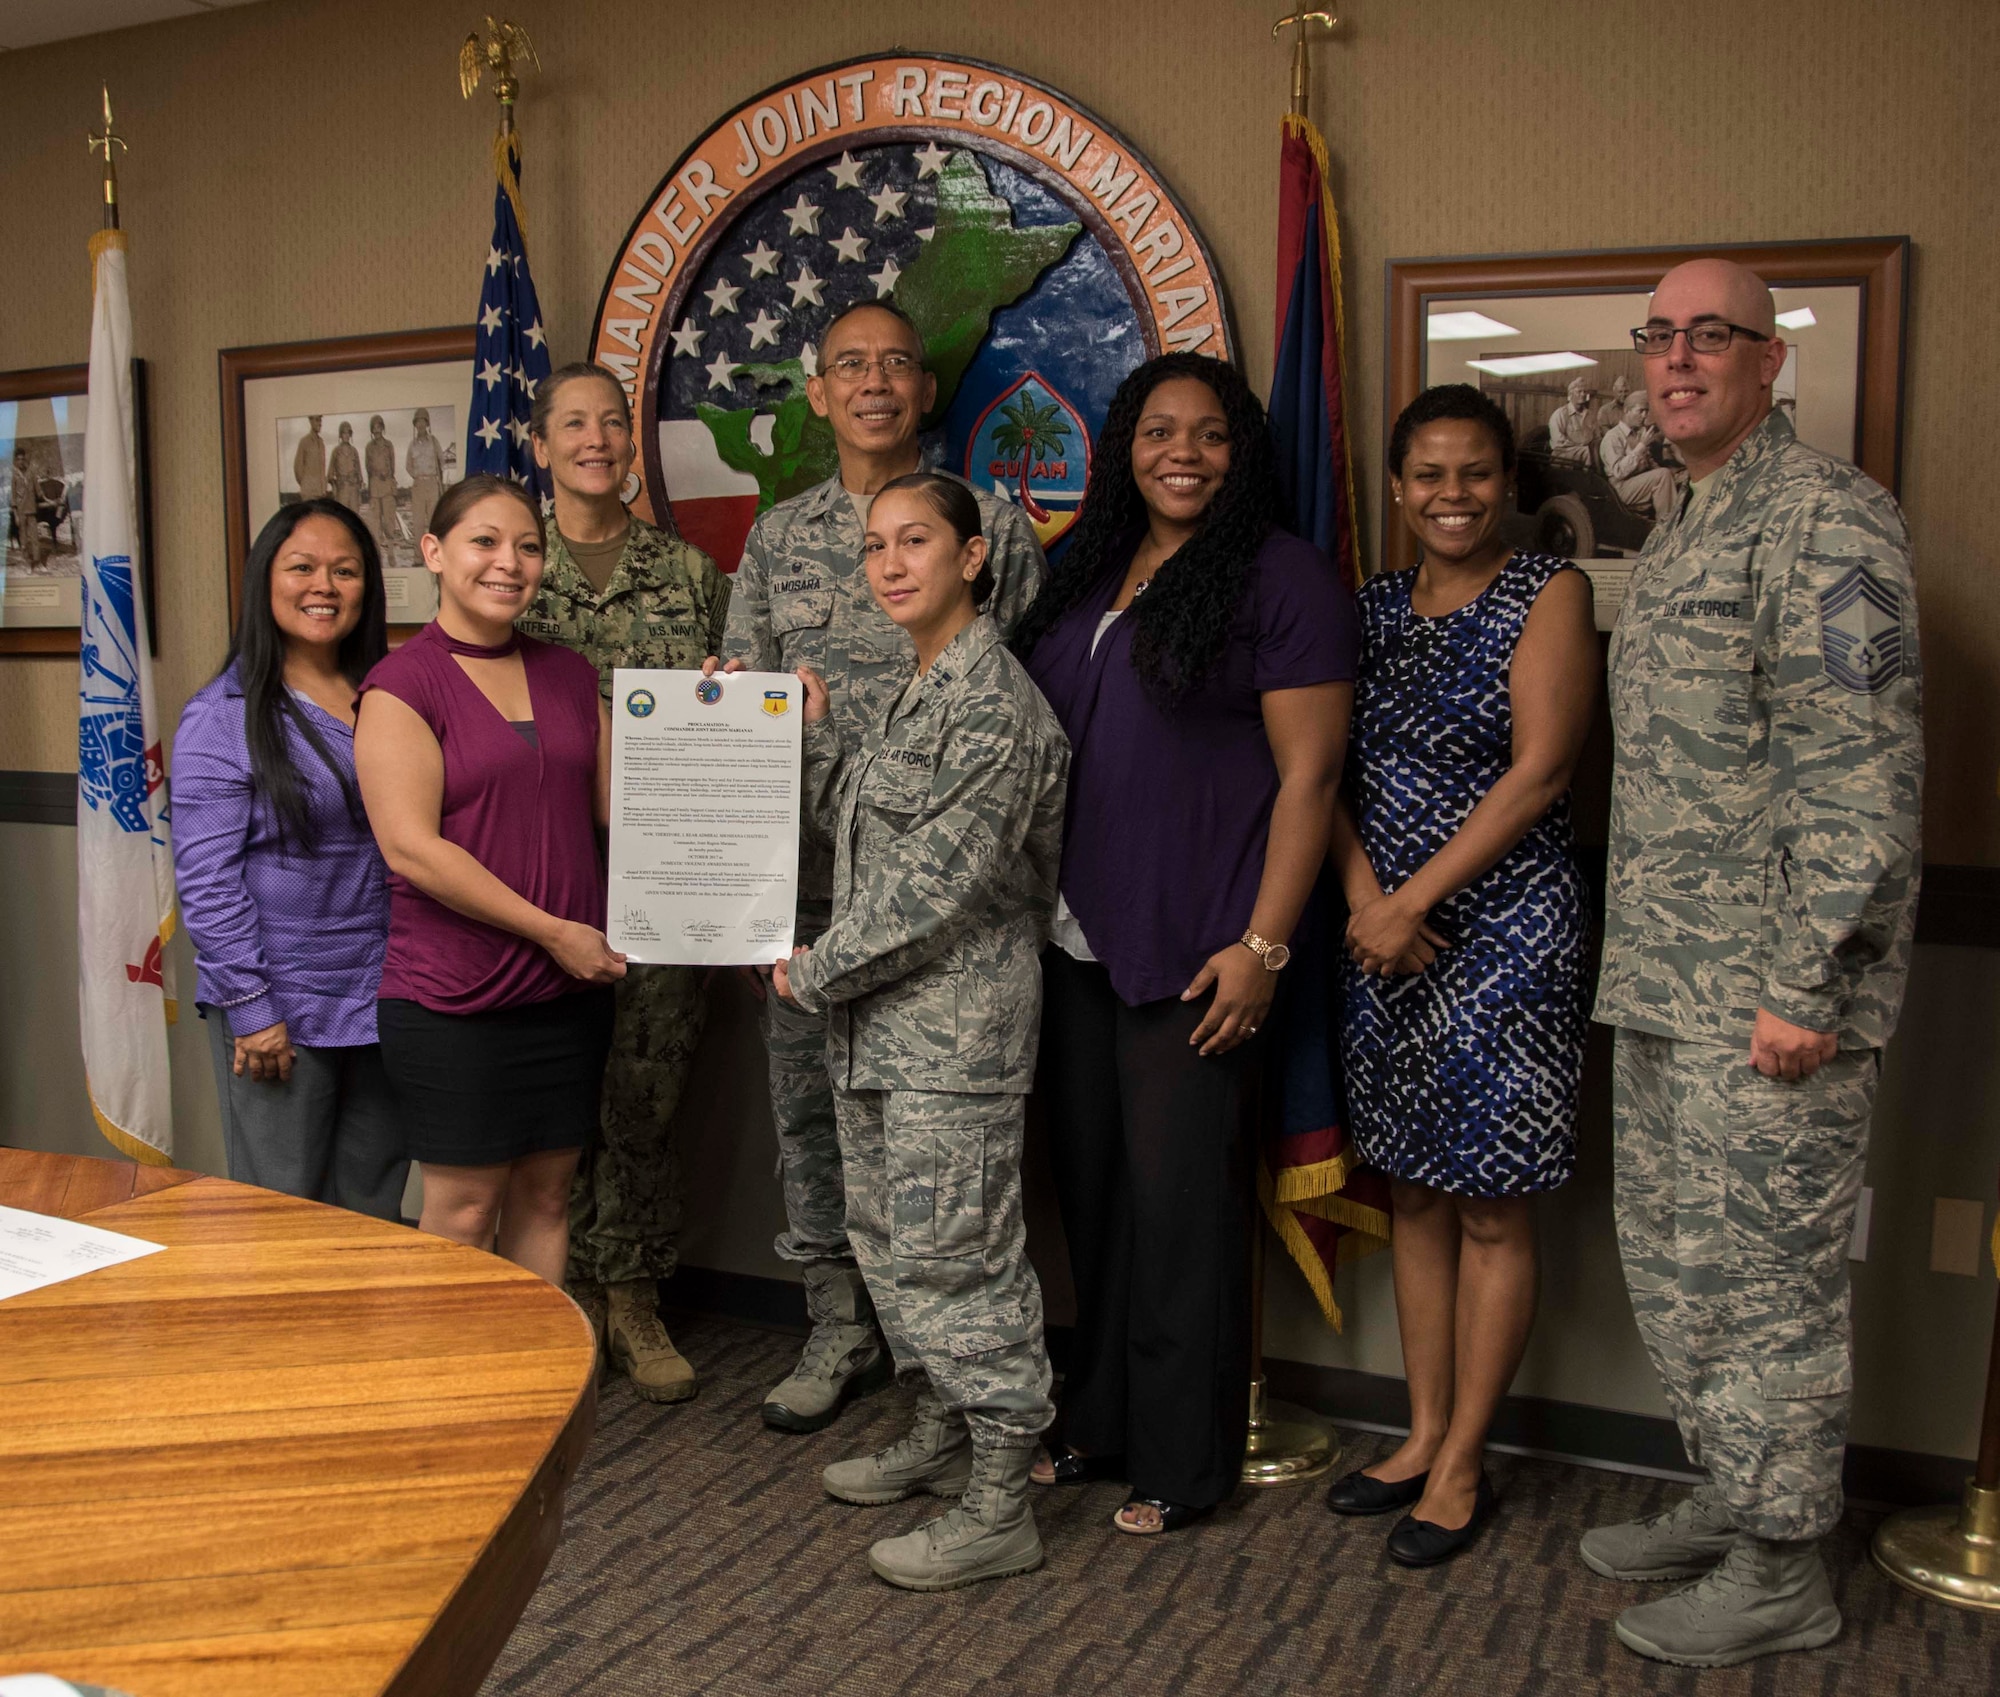 Members with the 36th Medical Group and Joint Region Marianas (JRM) kick off Domestic Violence Awareness month by signing a proclamation at JRM headquarters in Asan, Guam, Oct. 2, 2017. Domestic violence is an offense under the United States Code, the Uniform Code of Military Justice and state law. Regulations require military and Department of Defense officials to report any suspicion of family violence. This includes commanders, first sergeants, supervisors, medical personnel and military police. (U.S. Navy photo by JoAnna Delfin)